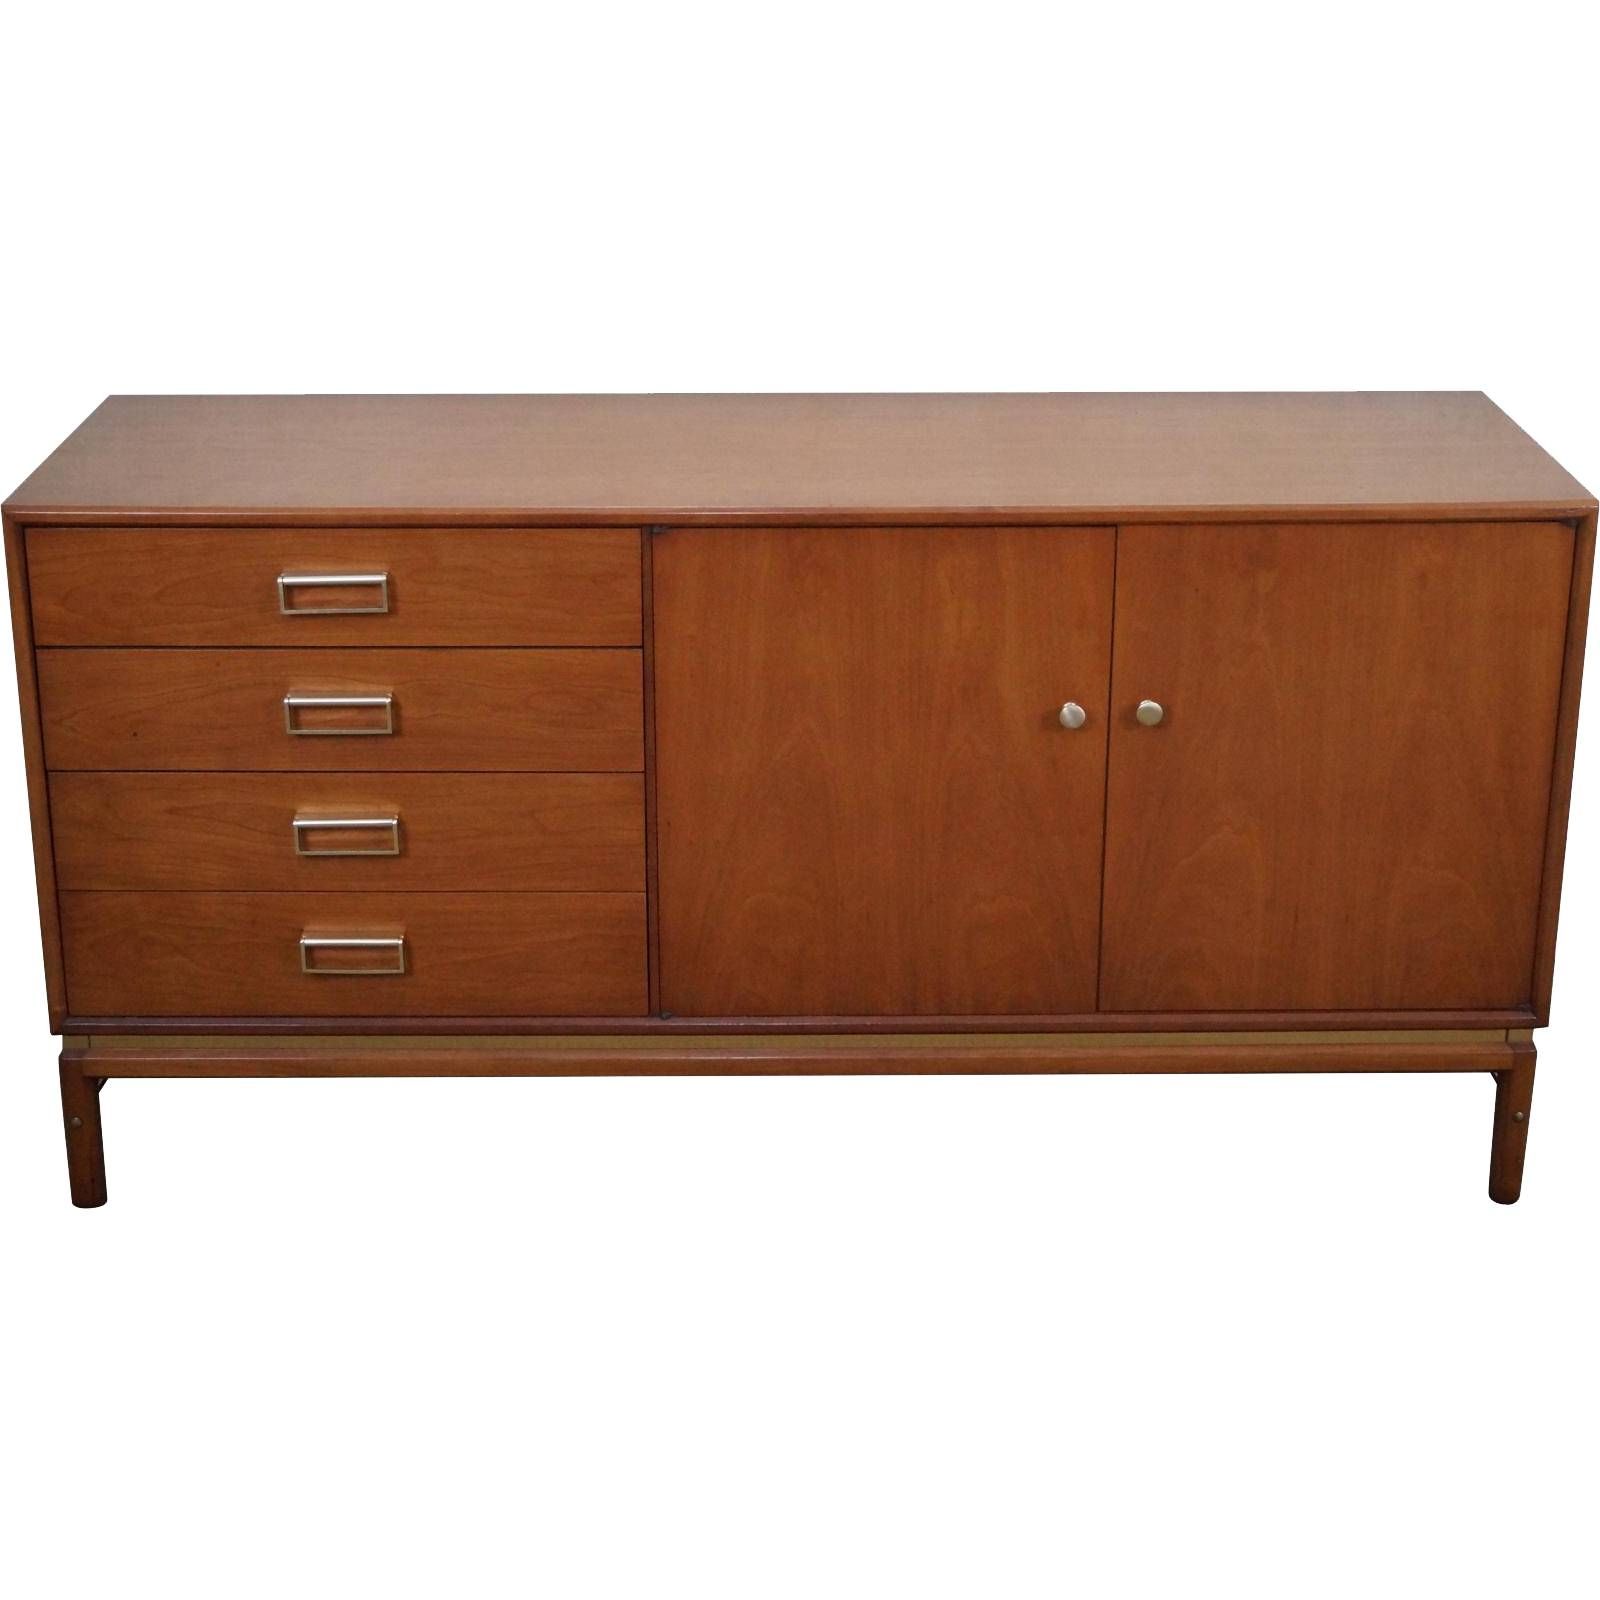 Drexel Suncoast Kipp Stewart Mid Century Modern Sideboard From Throughout Most Current Mid Century Modern Sideboards (Photo 6 of 15)